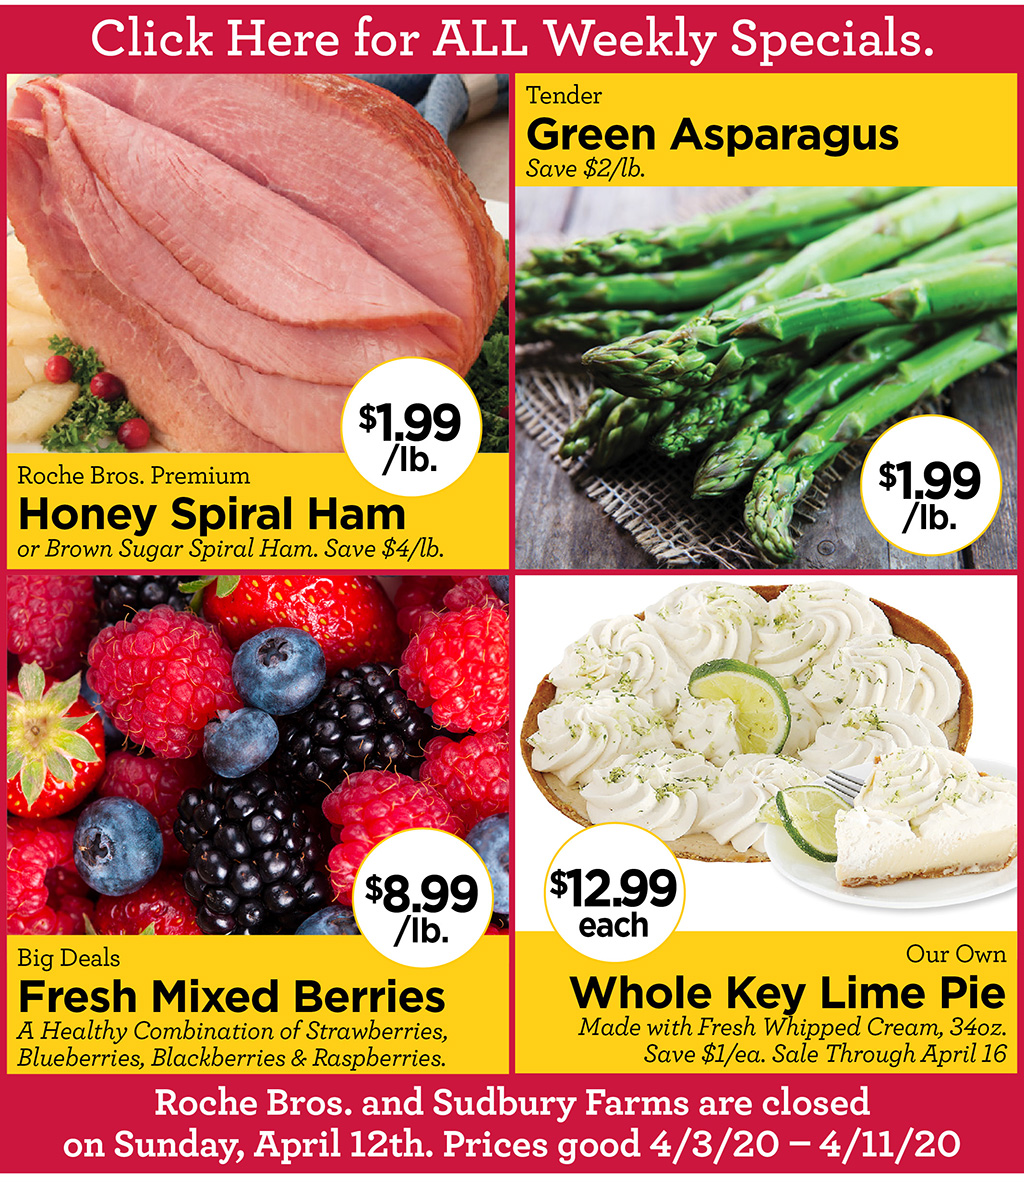 Roche Bros. Premium Honey Spiral Ham $1.99/lb. or Brown Sugar Spiral Ham. Save $4/lb., Tender Green Asparagus $1.99/lb. Save $2/lb., Big Deals Fresh Mixed Berries $8.99/lb. A Healthy Combination of Strawberries, Blueberries, Blackberries & Raspberries., Our Own Whole Key Lime Pie $12.99 each Made with Fresh Whipped Cream, 34oz. Save $1/ea. Sale Through April 16  Roche Bros. and Sudbury Farms are closed on Sunday, April 12th. Prices good 4/3/20 - 4/11/20